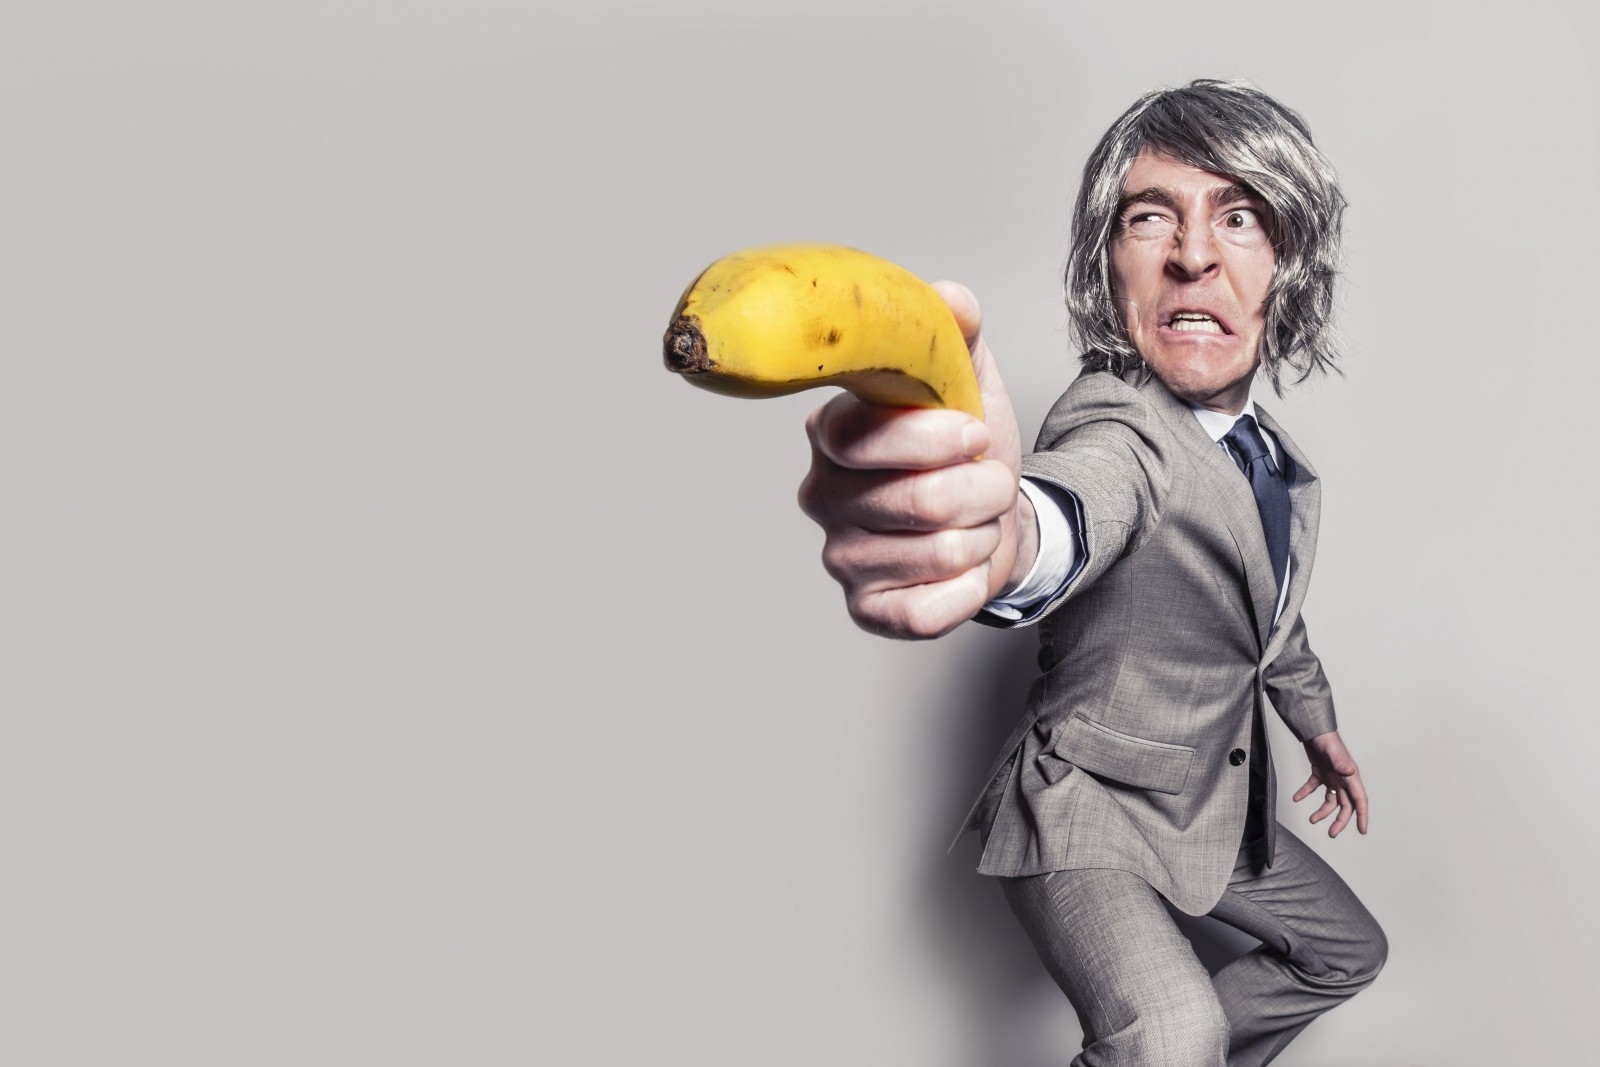 Average look of a business man holding a banana as a weapon